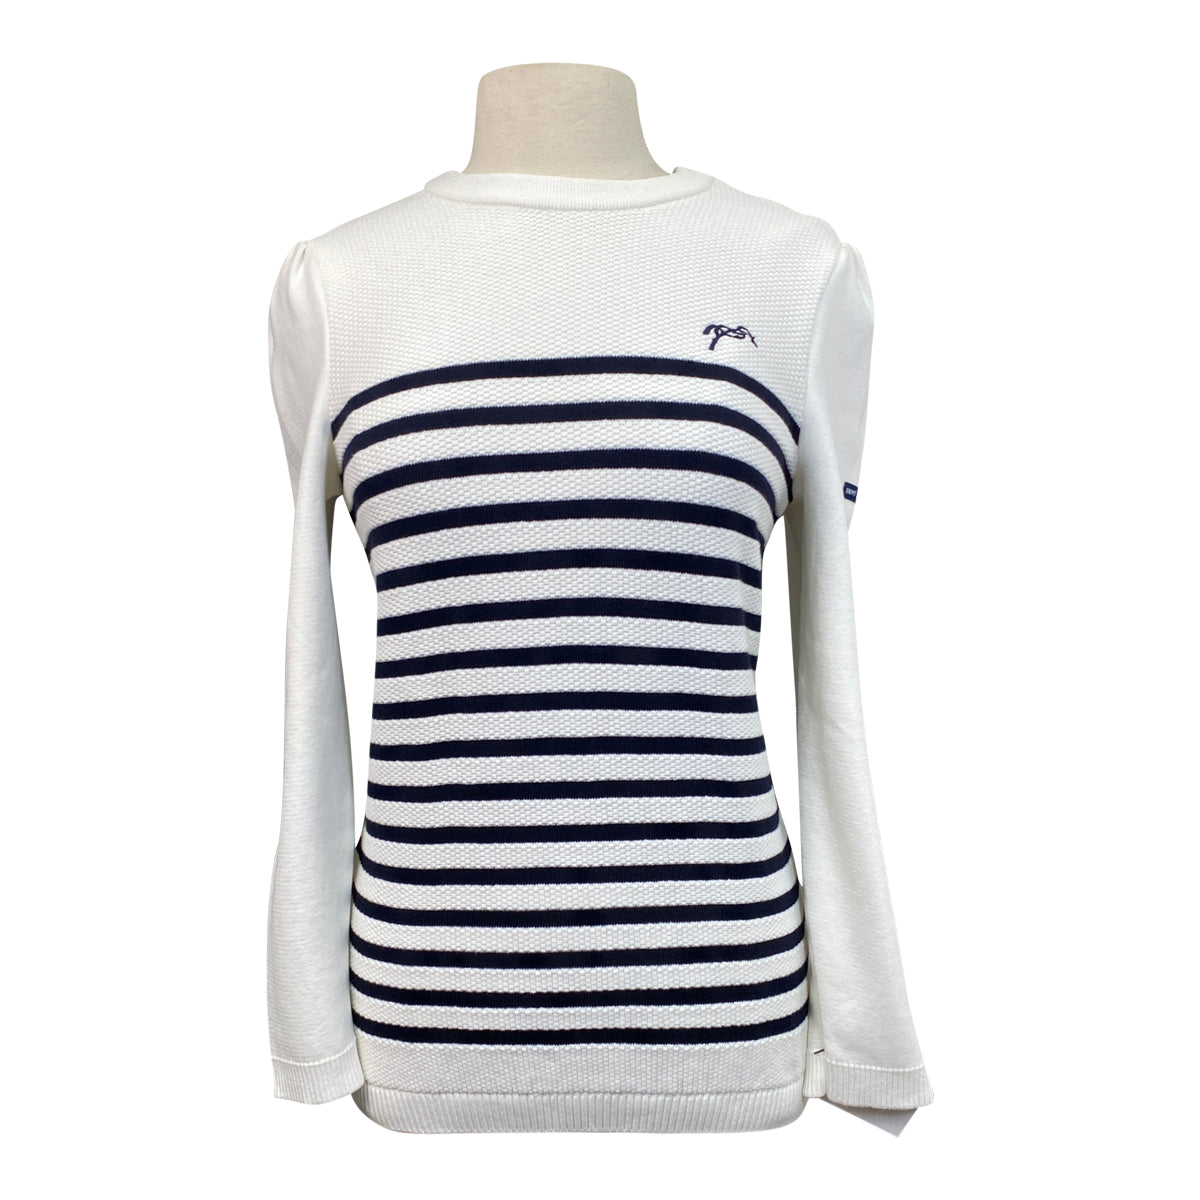 Penelope X St. James Maelle Pullover Sweater in Cream/Navy Stripes